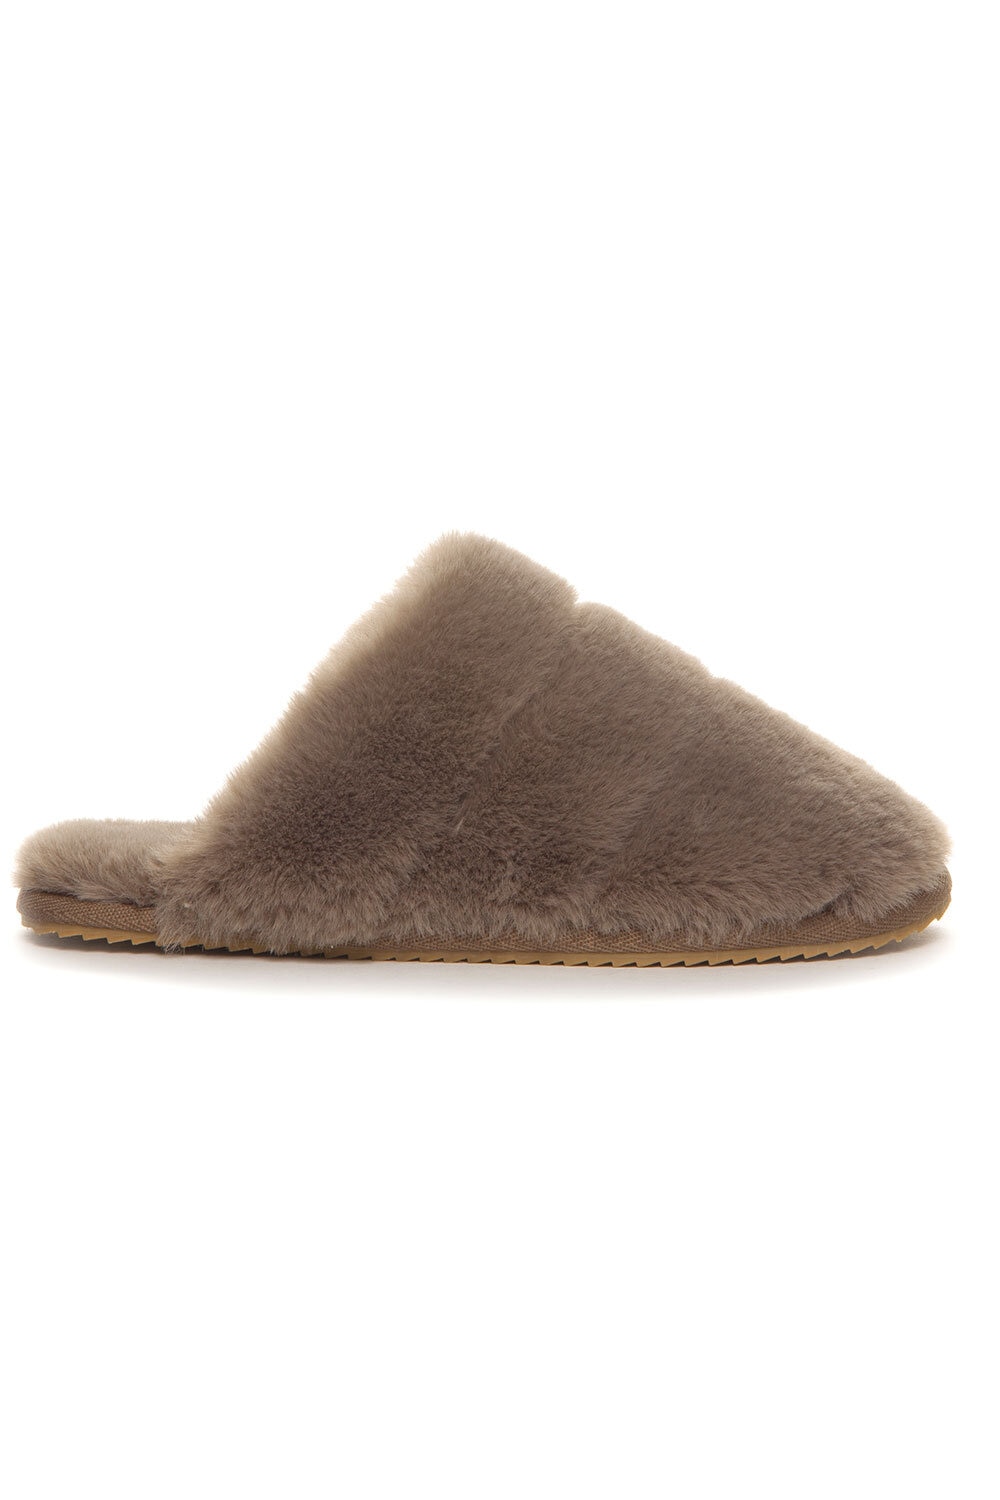 Faux Fur Slippers - Taupe